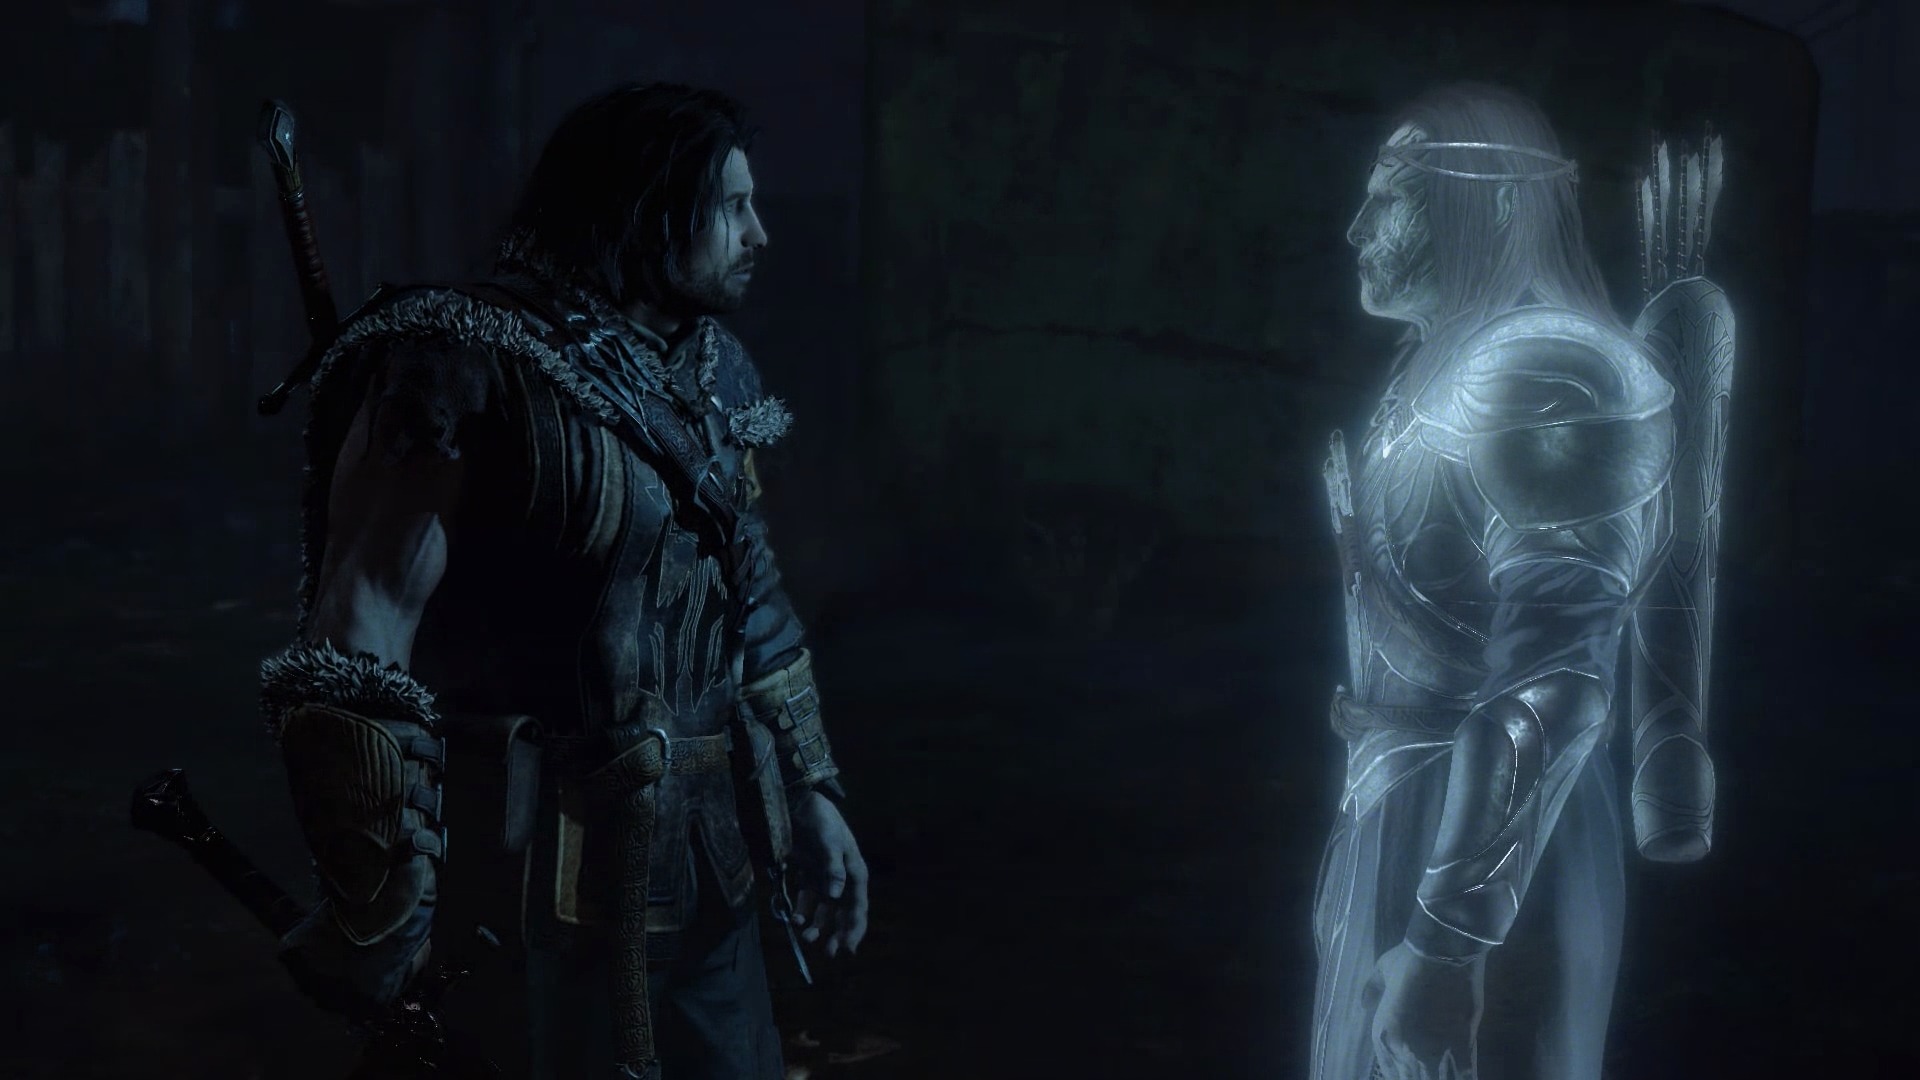 Middle-earth: Shadow of Mordor review: My precioussss